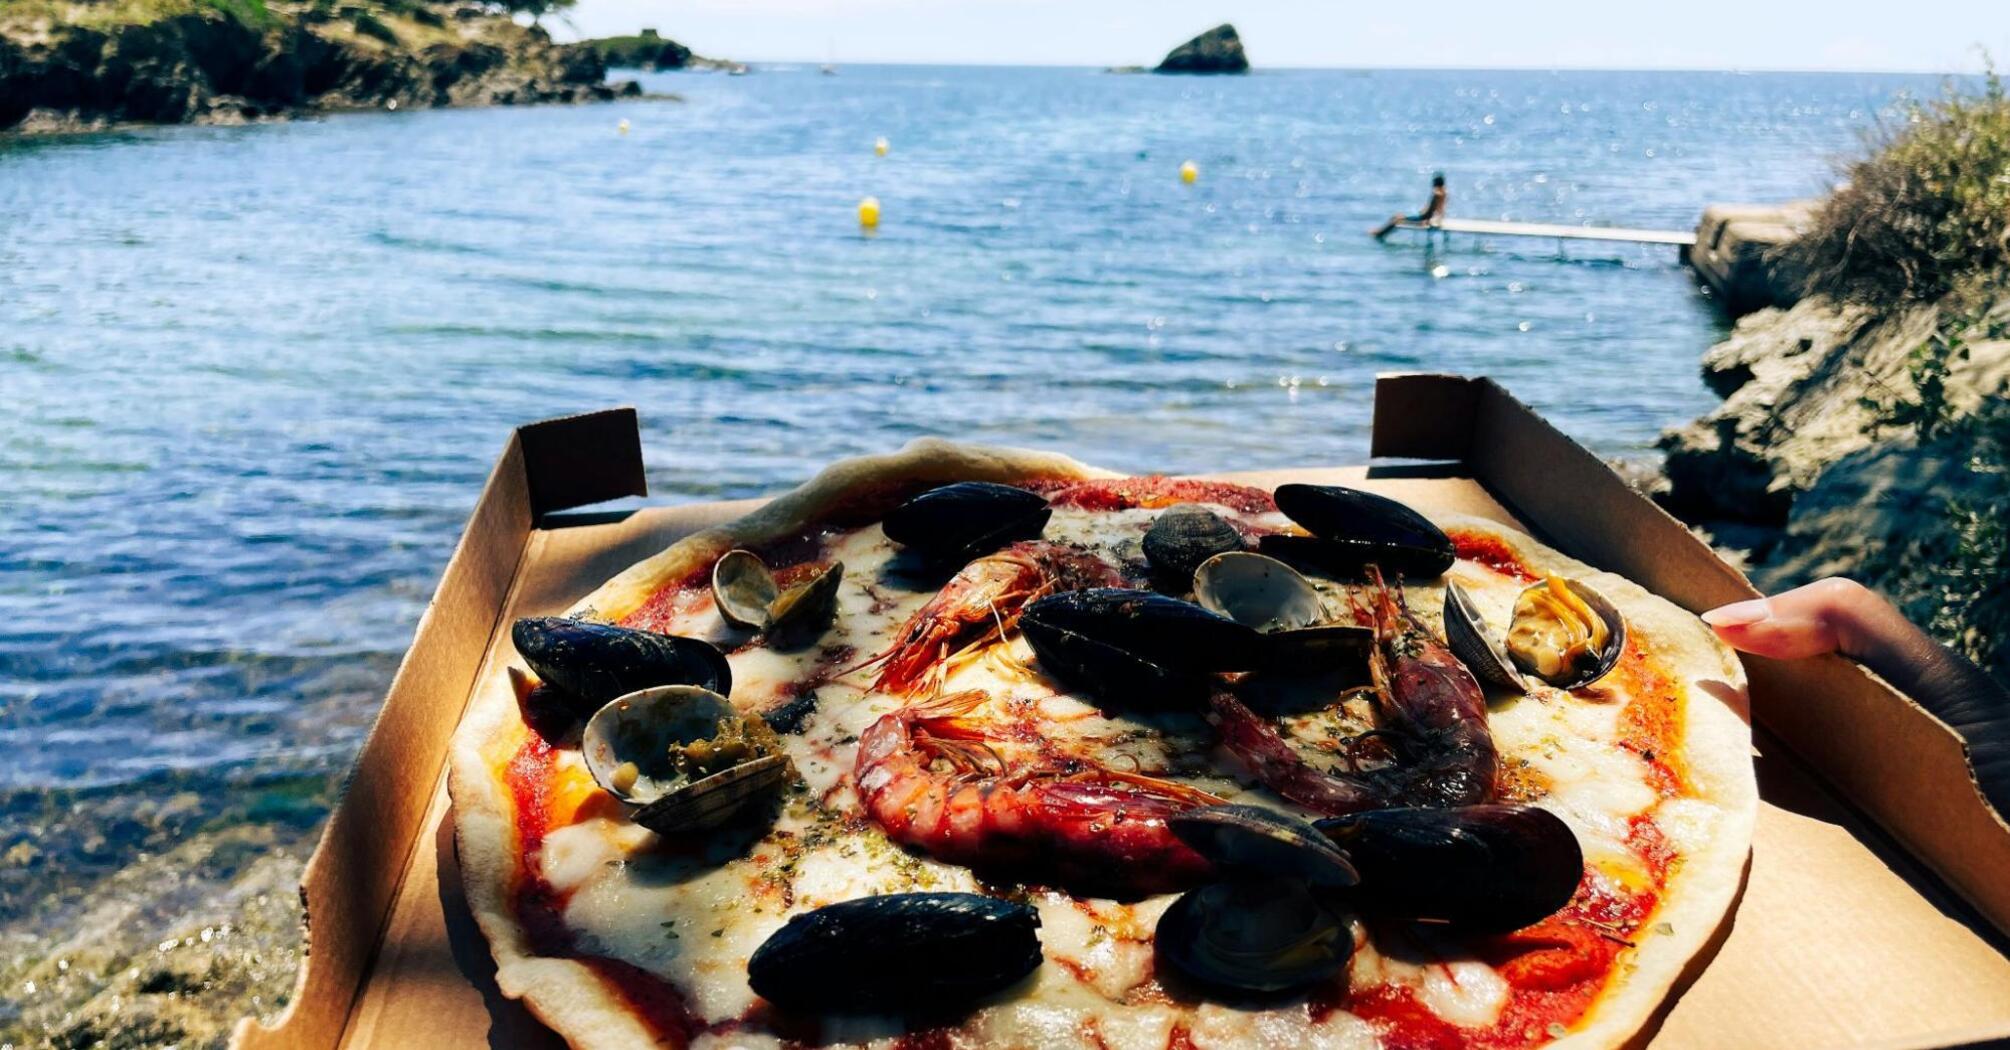 Pizza with seafood on the beach of Costa Brava